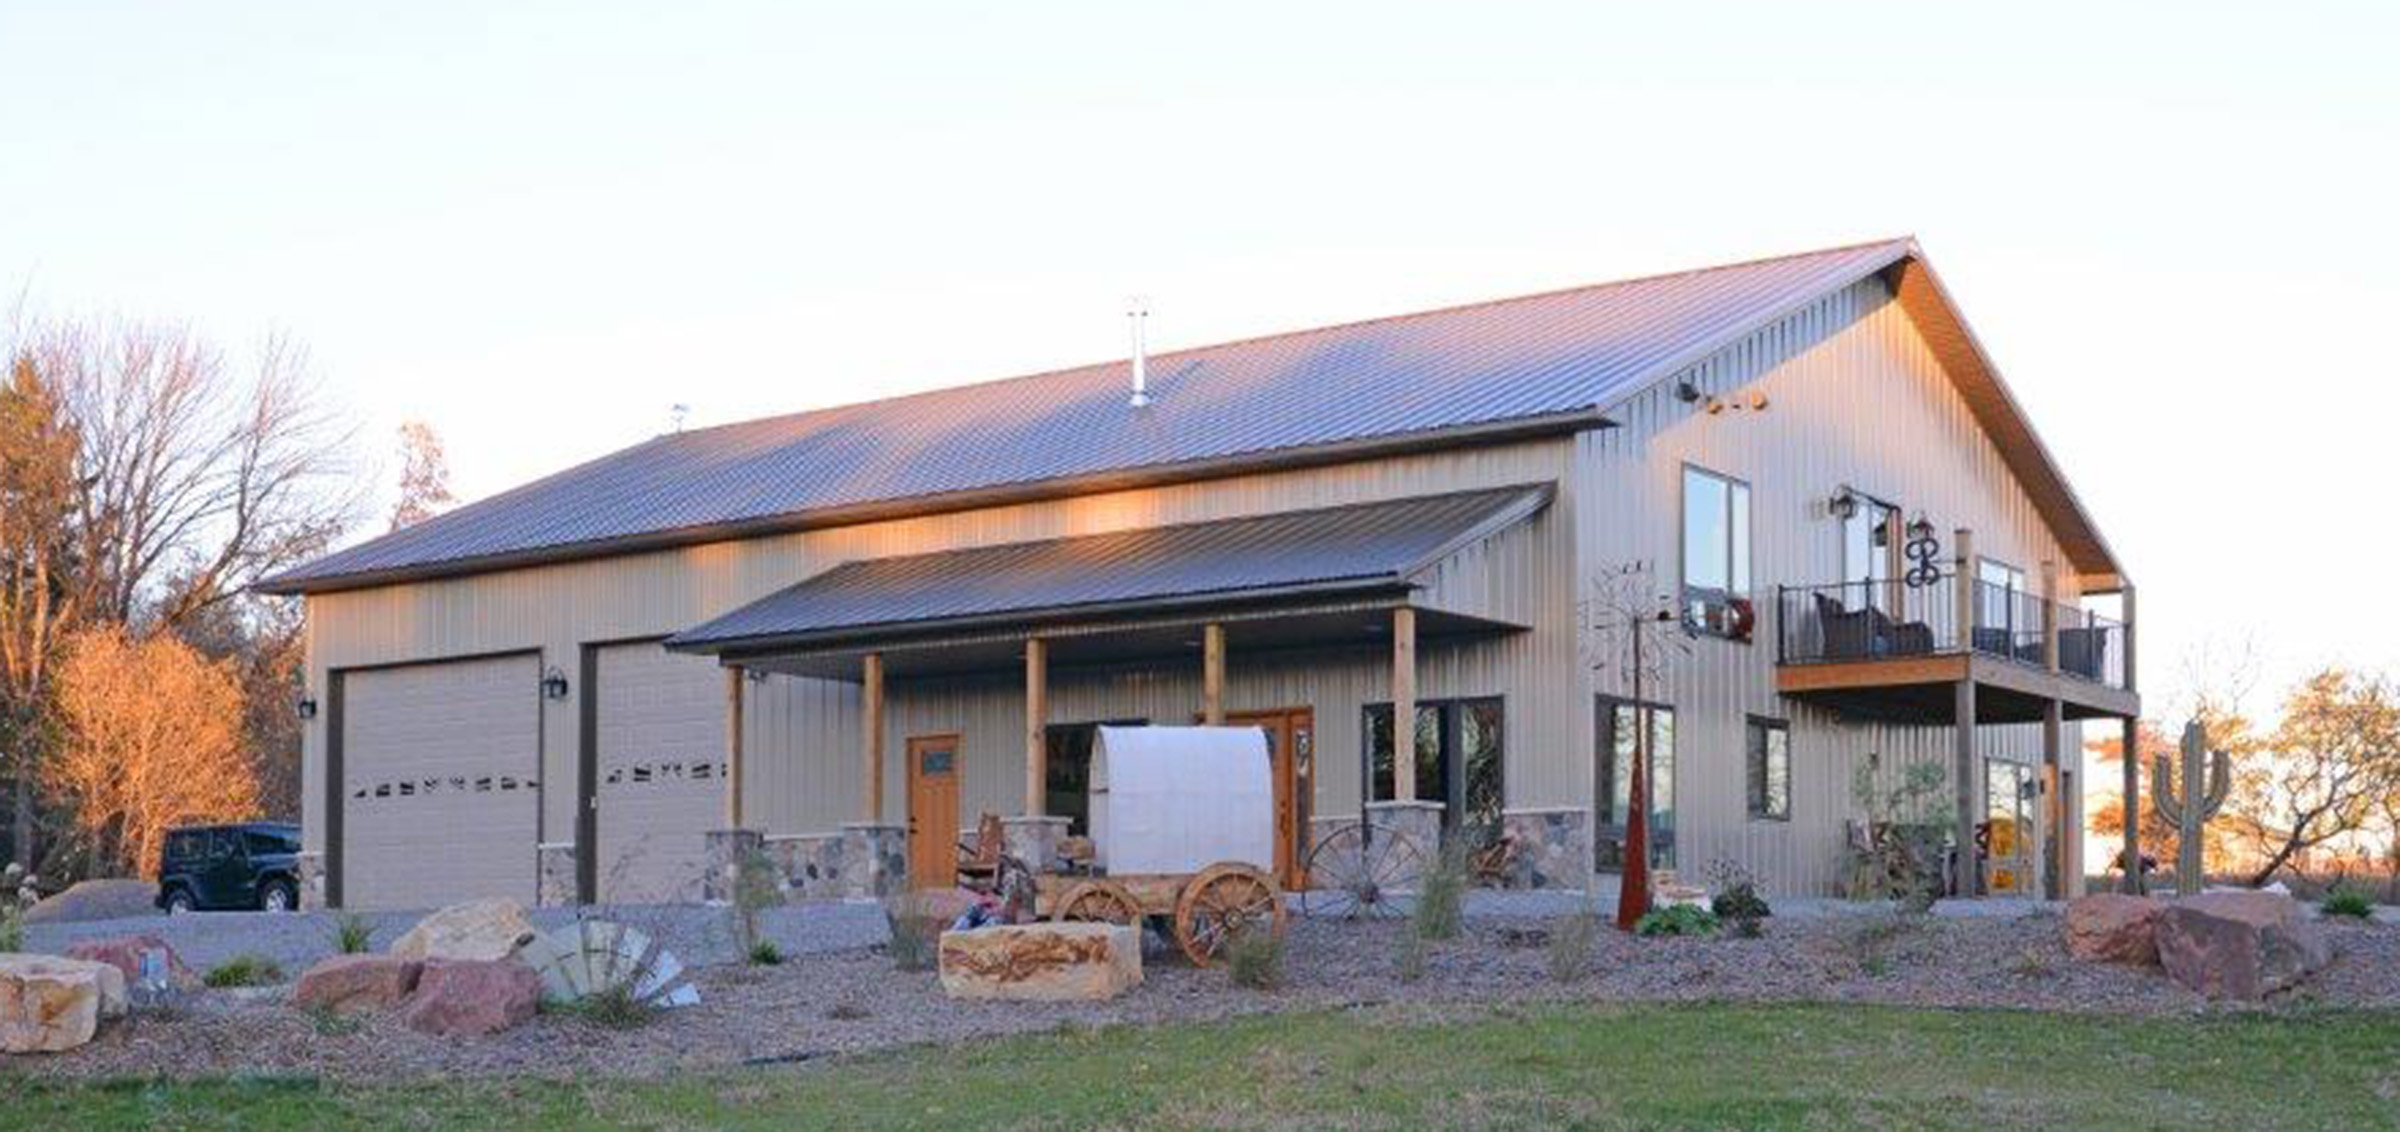 tan pole barn residential home with a old west decor and landscaping